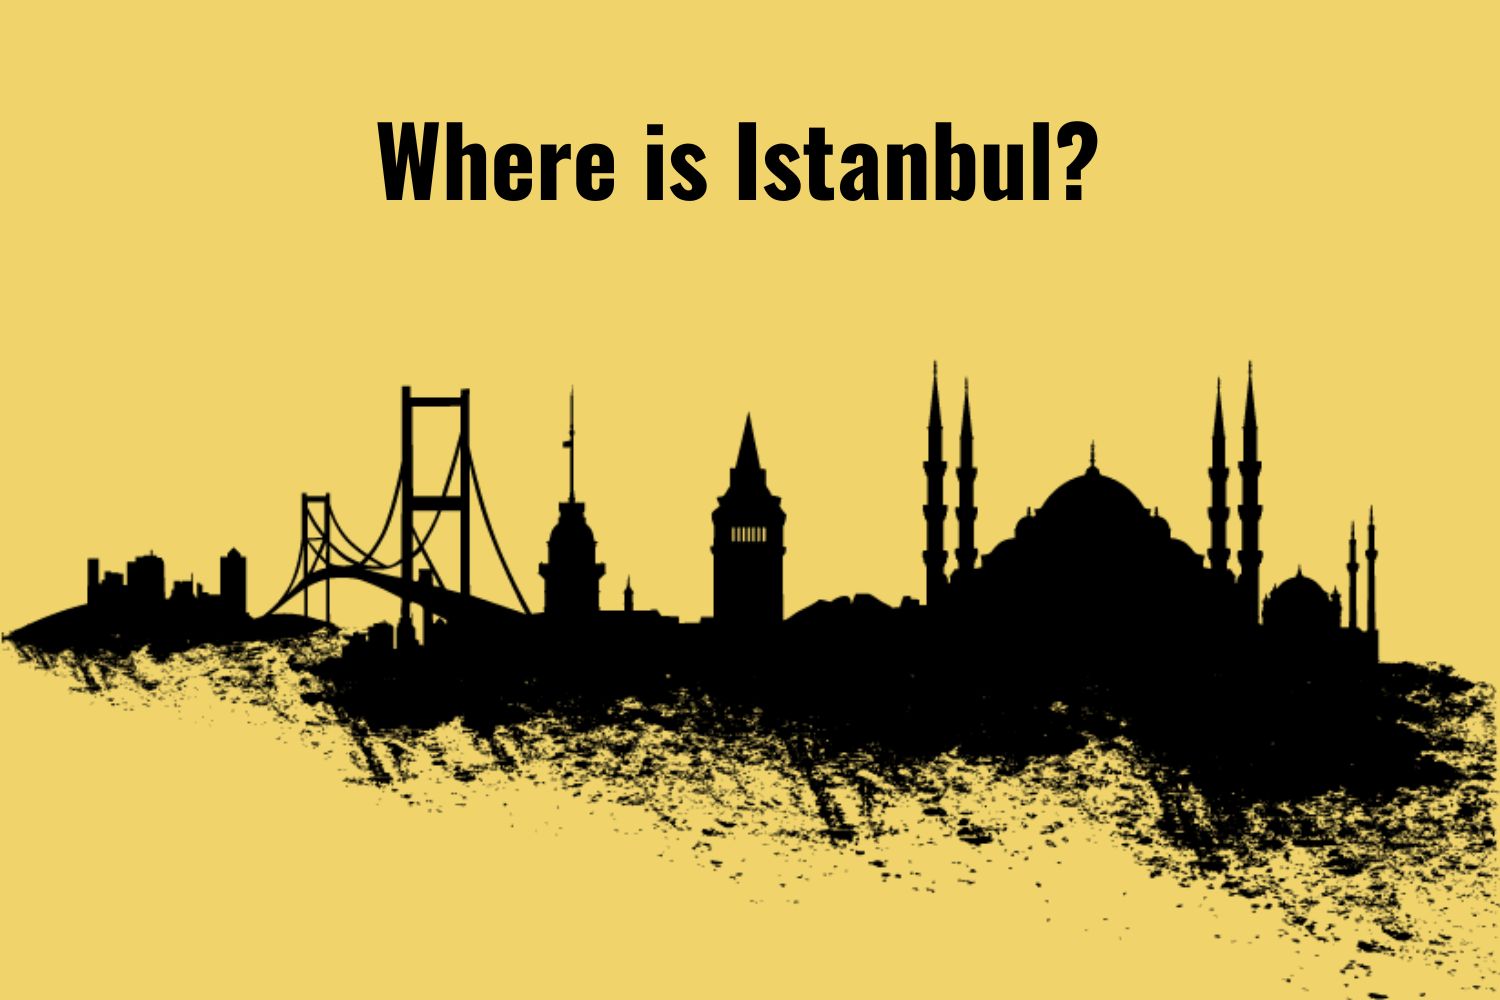 Where is Istanbul? Istanbul skyline on a yellow background.